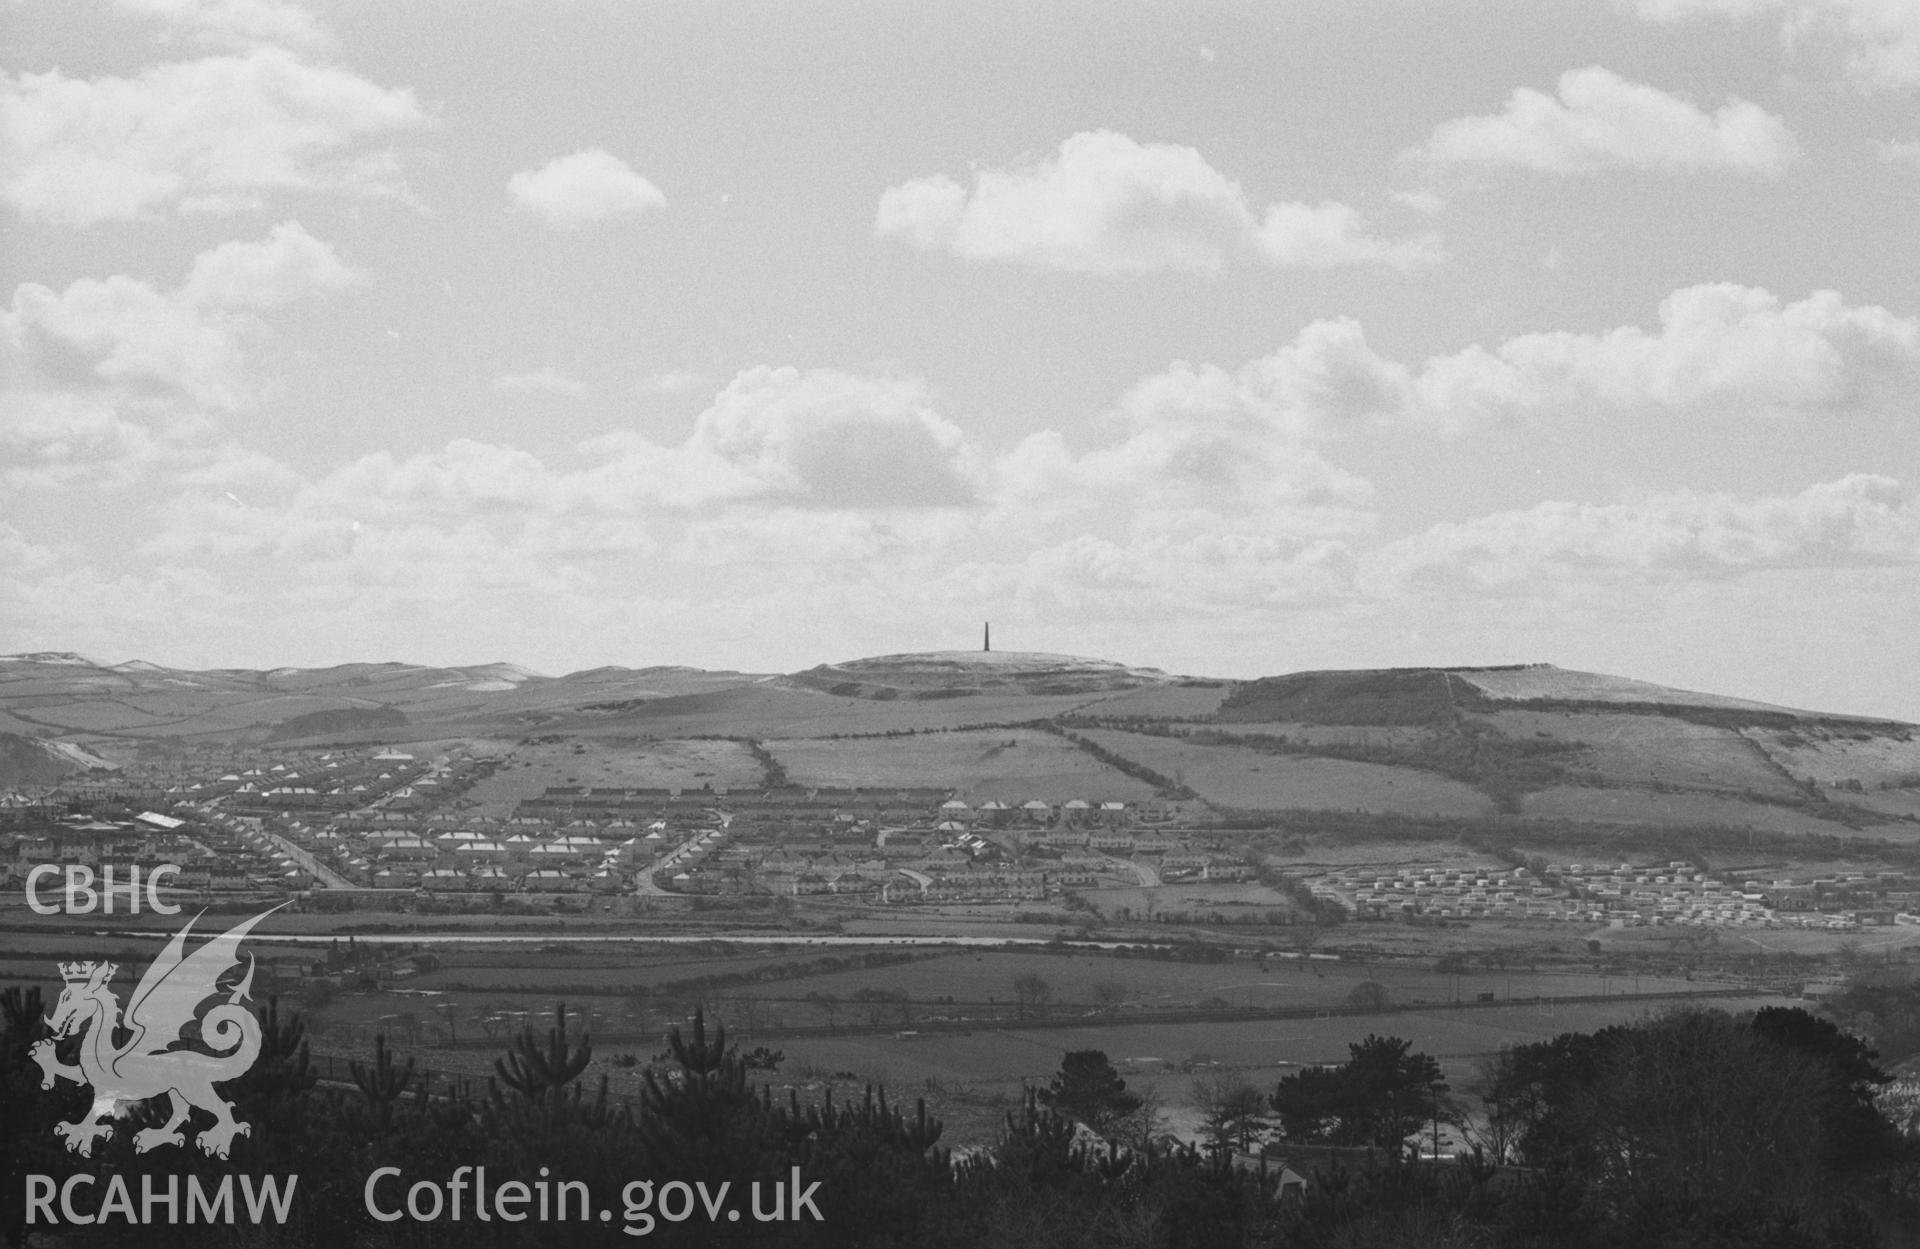 Digital copy of a black and white negative showing Pendinas and Penparcau under a thin layer of snow, from the University College Wales site on Penglais. Photographed by Arthur O. Chater in April 1968. (Looking south west from Grid Reference SN 598 619).